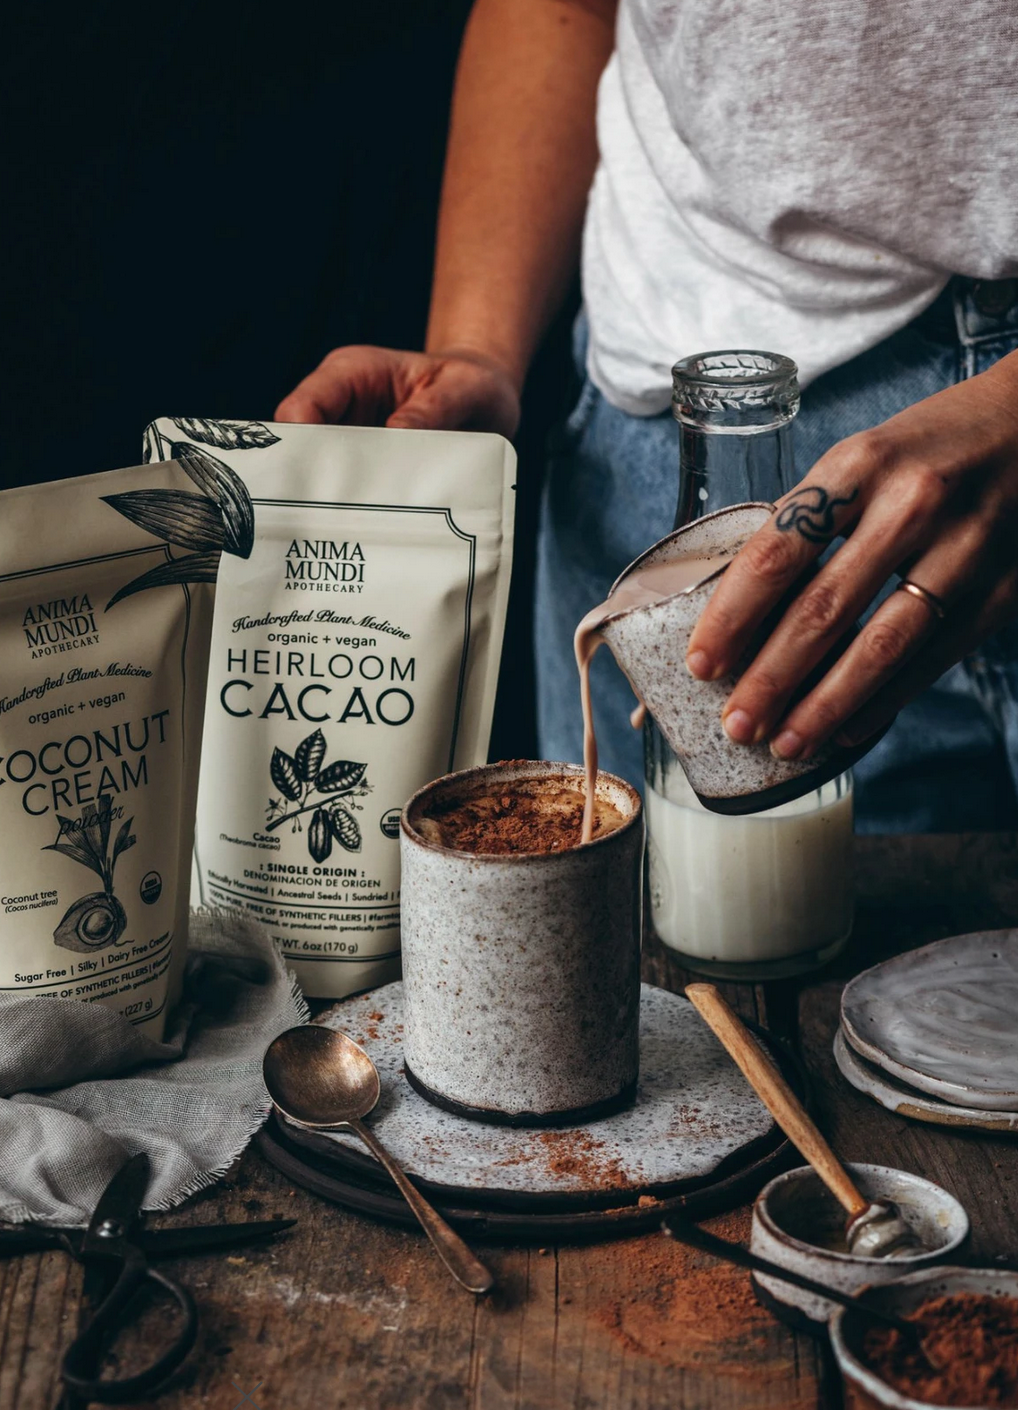 Heirloom Cacao Powder (6oz) | Anima Mundi Herbals | Raw Living UK | Raw Foods | Super Foods | Anima Mundi&#39;s Heirloom Cacao Powder is High Quality &amp; Organic. This Cacao comes from Peru &amp; it is packed with Anti-Oxidants, Iron, Magnesium &amp; Bliss Chemicals!